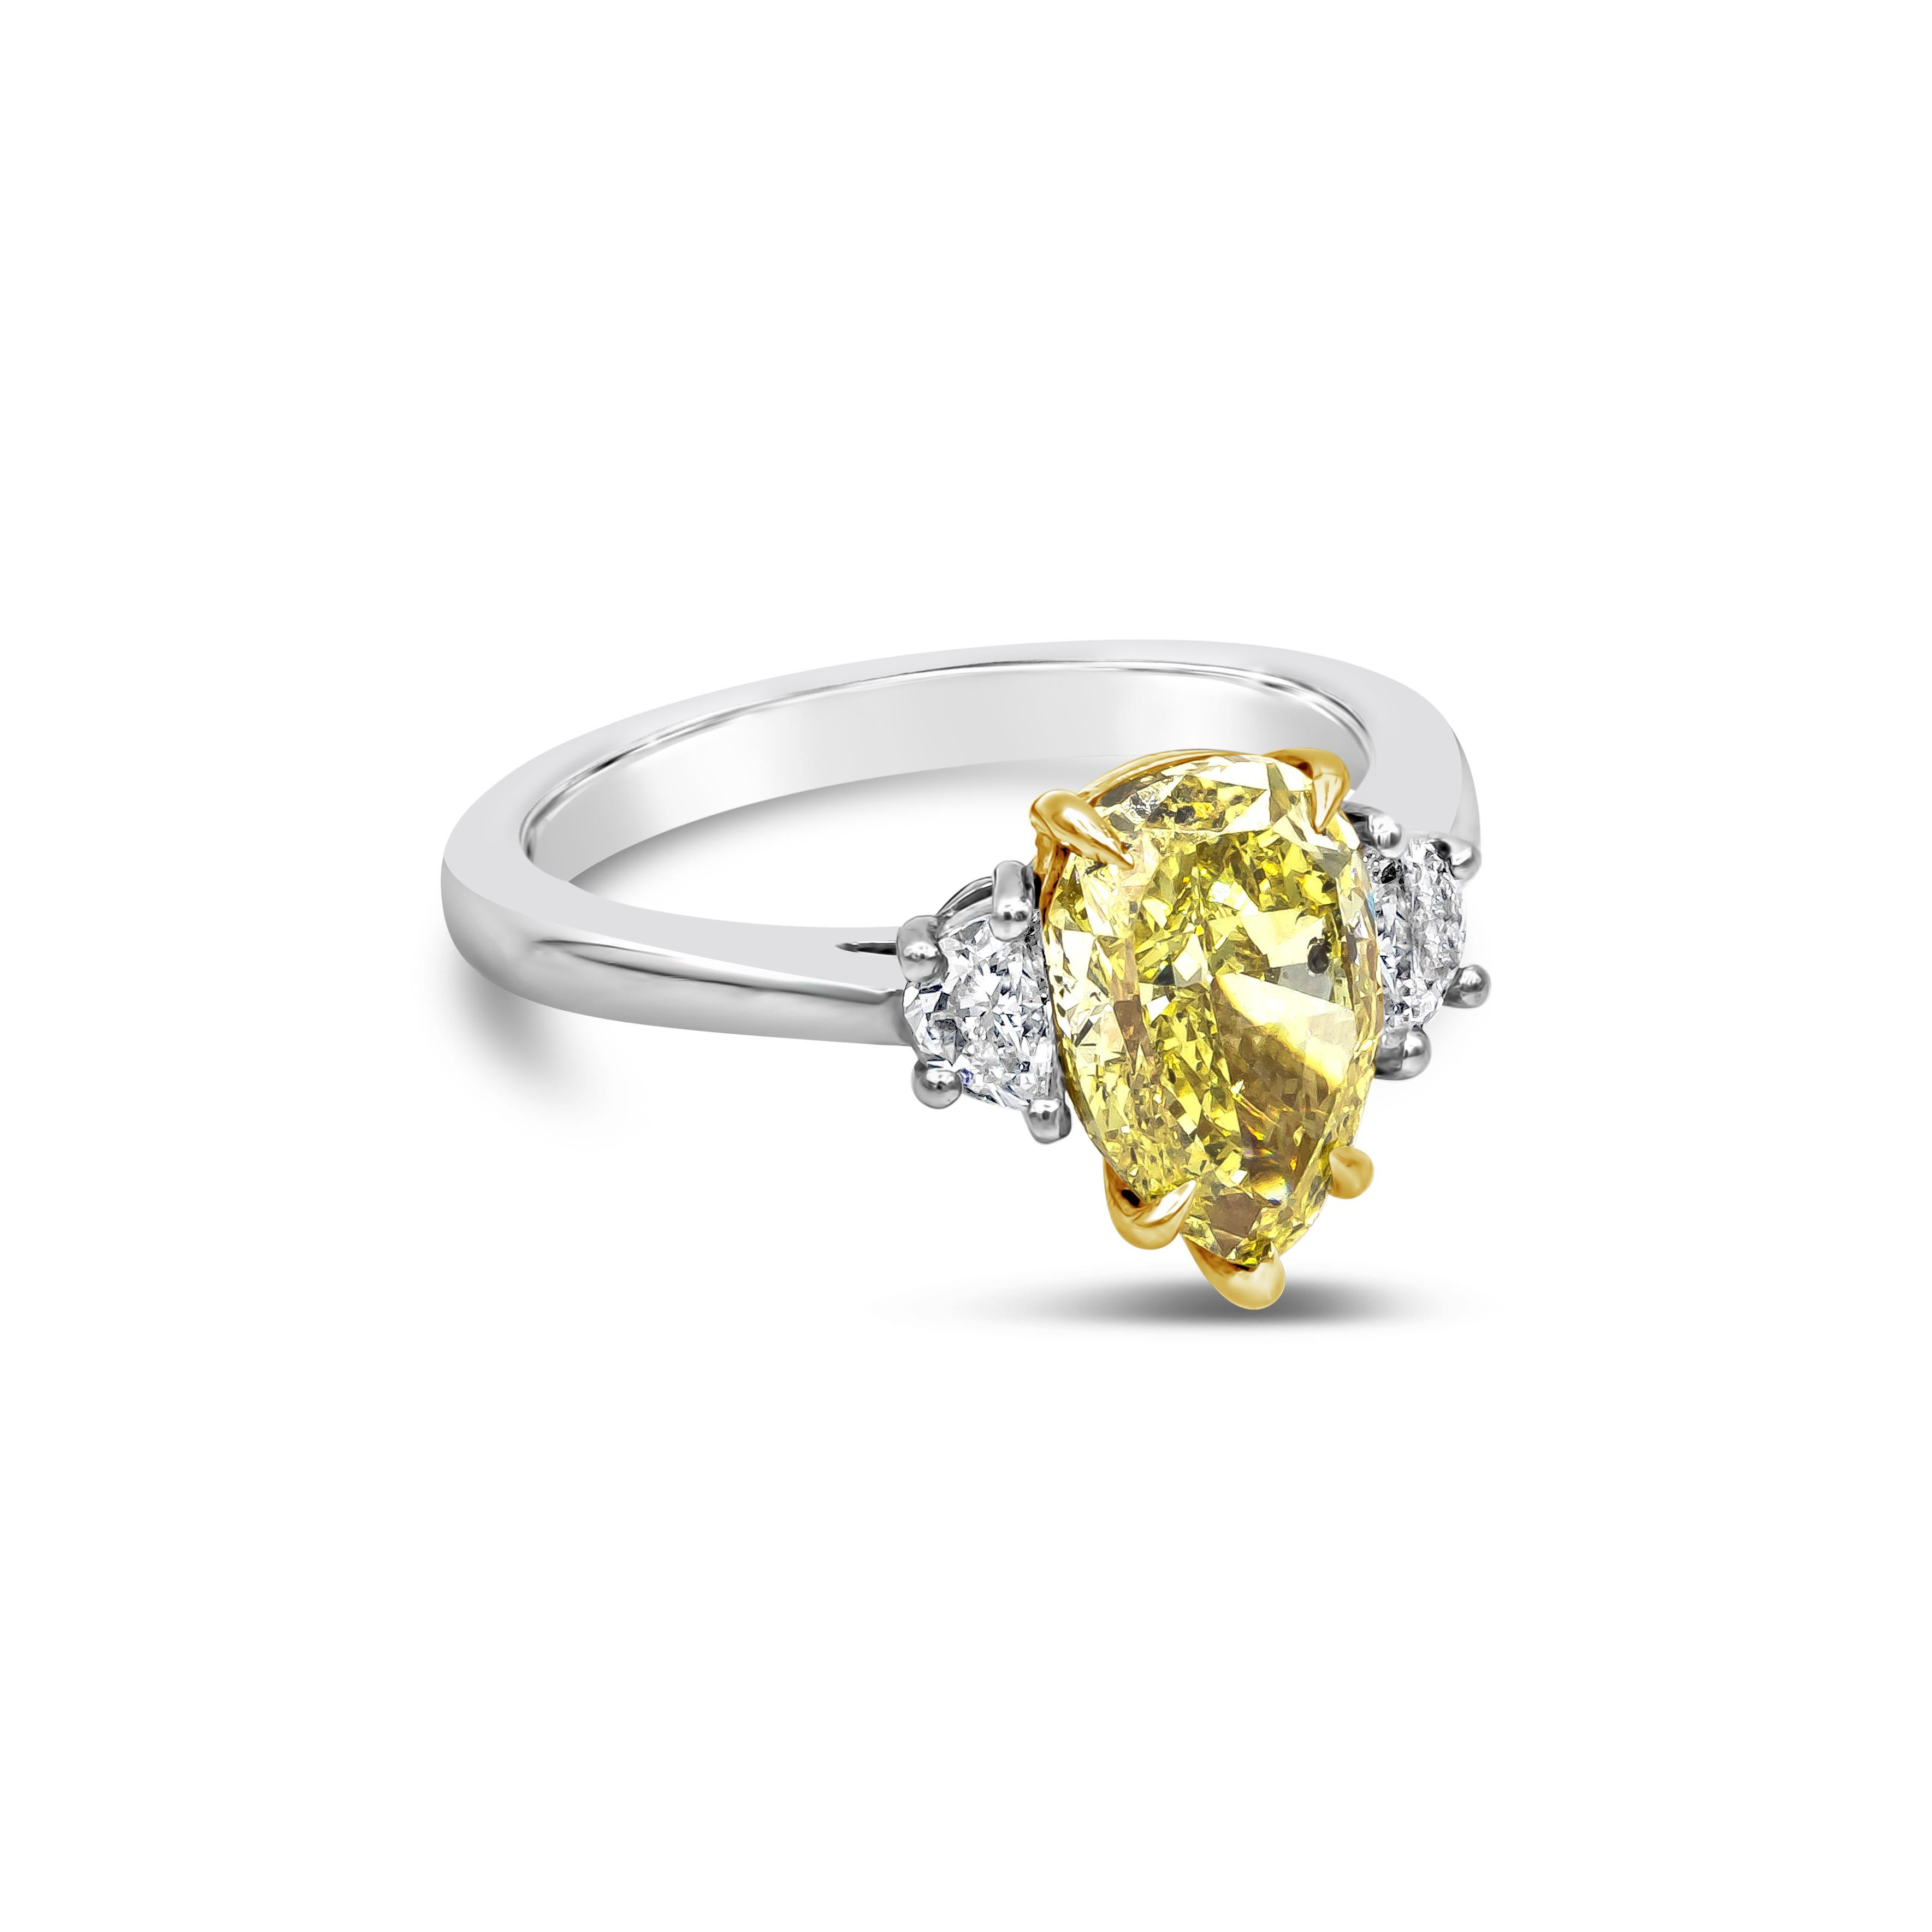 An elegant and stunning three-stone engagement ring, showcasing a 2.18 carats pear shape diamond certified by GIA as Fancy Intense Yellow color, set on a five prong basket made of 18K yellow gold. Flanked by two half moon diamonds weighing 0.33